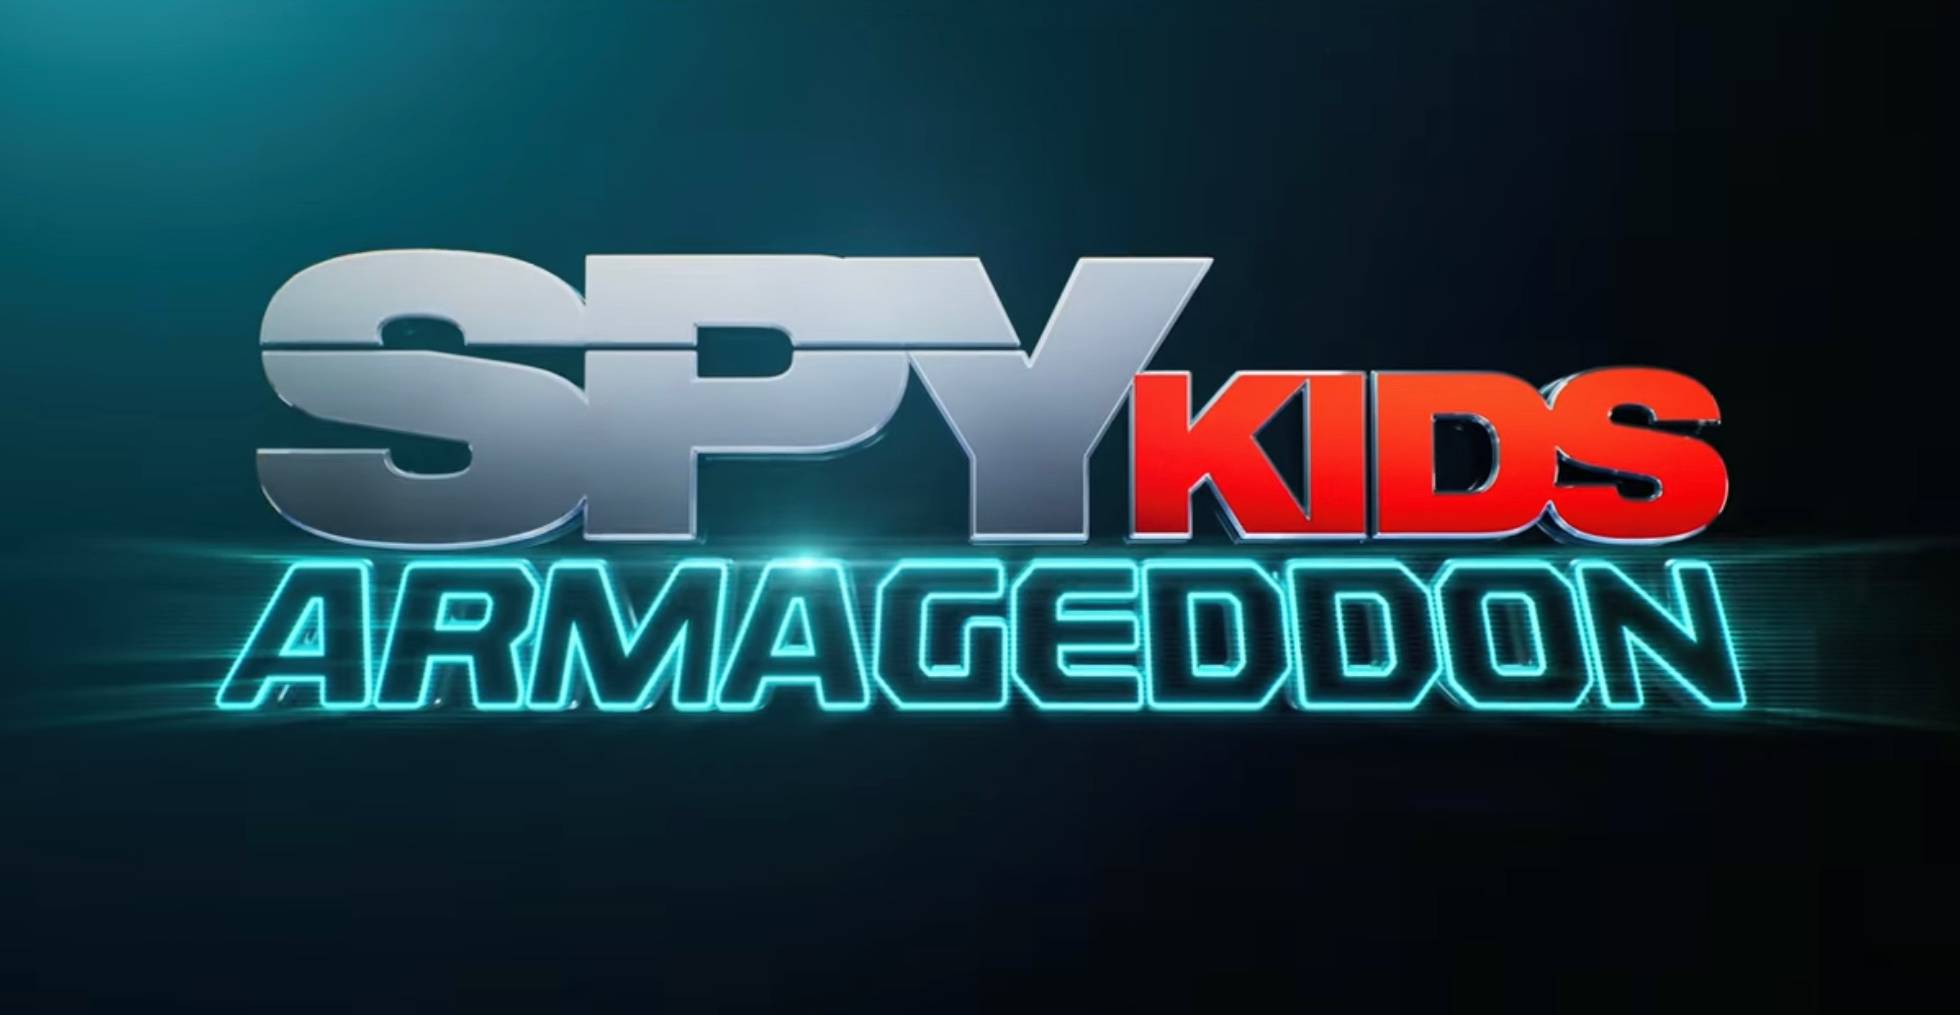 Teaser, history, cast and what you should know about the reboot of 'Mini Spies' 